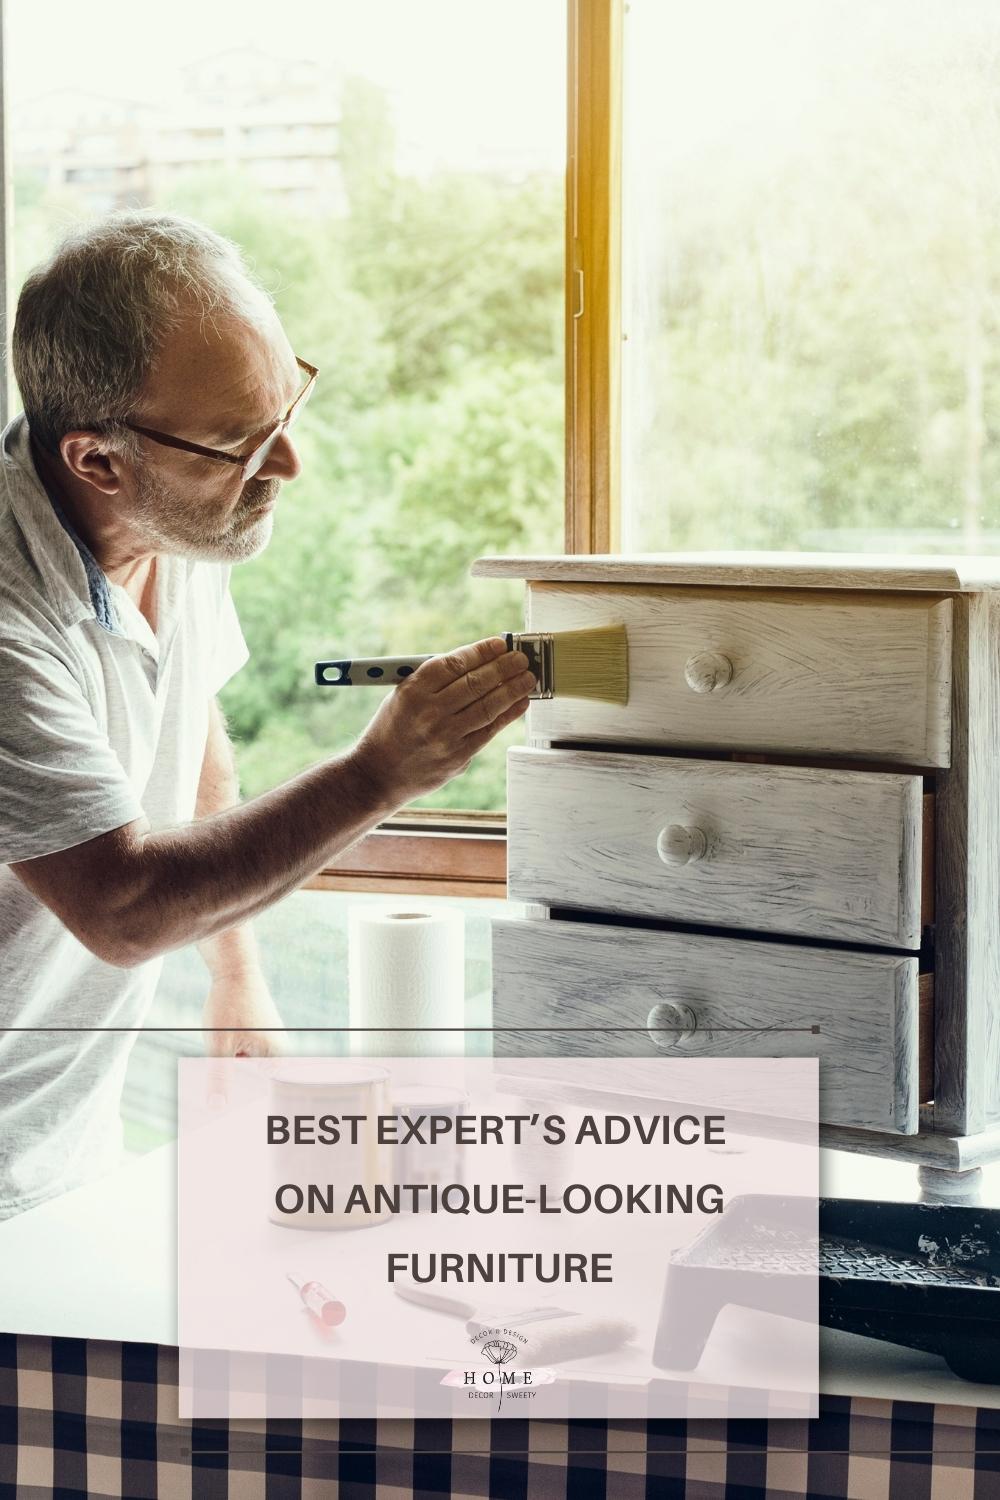 Best Expert’s Advice on Antique looking furniture